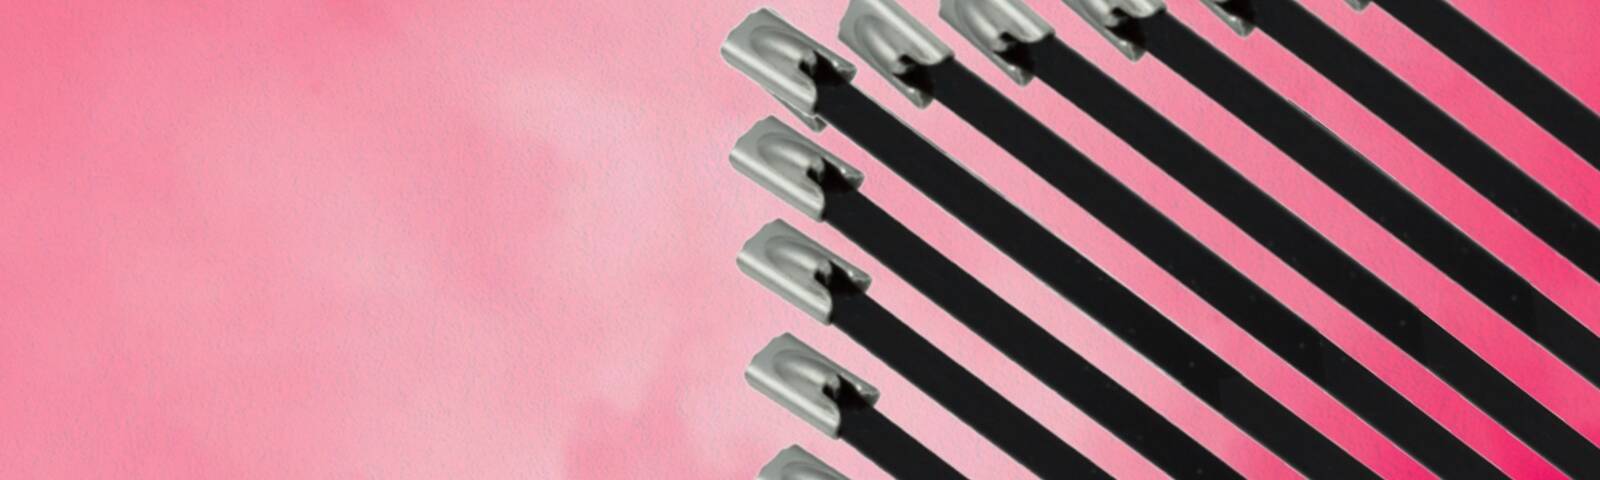 What are coated cable ties?